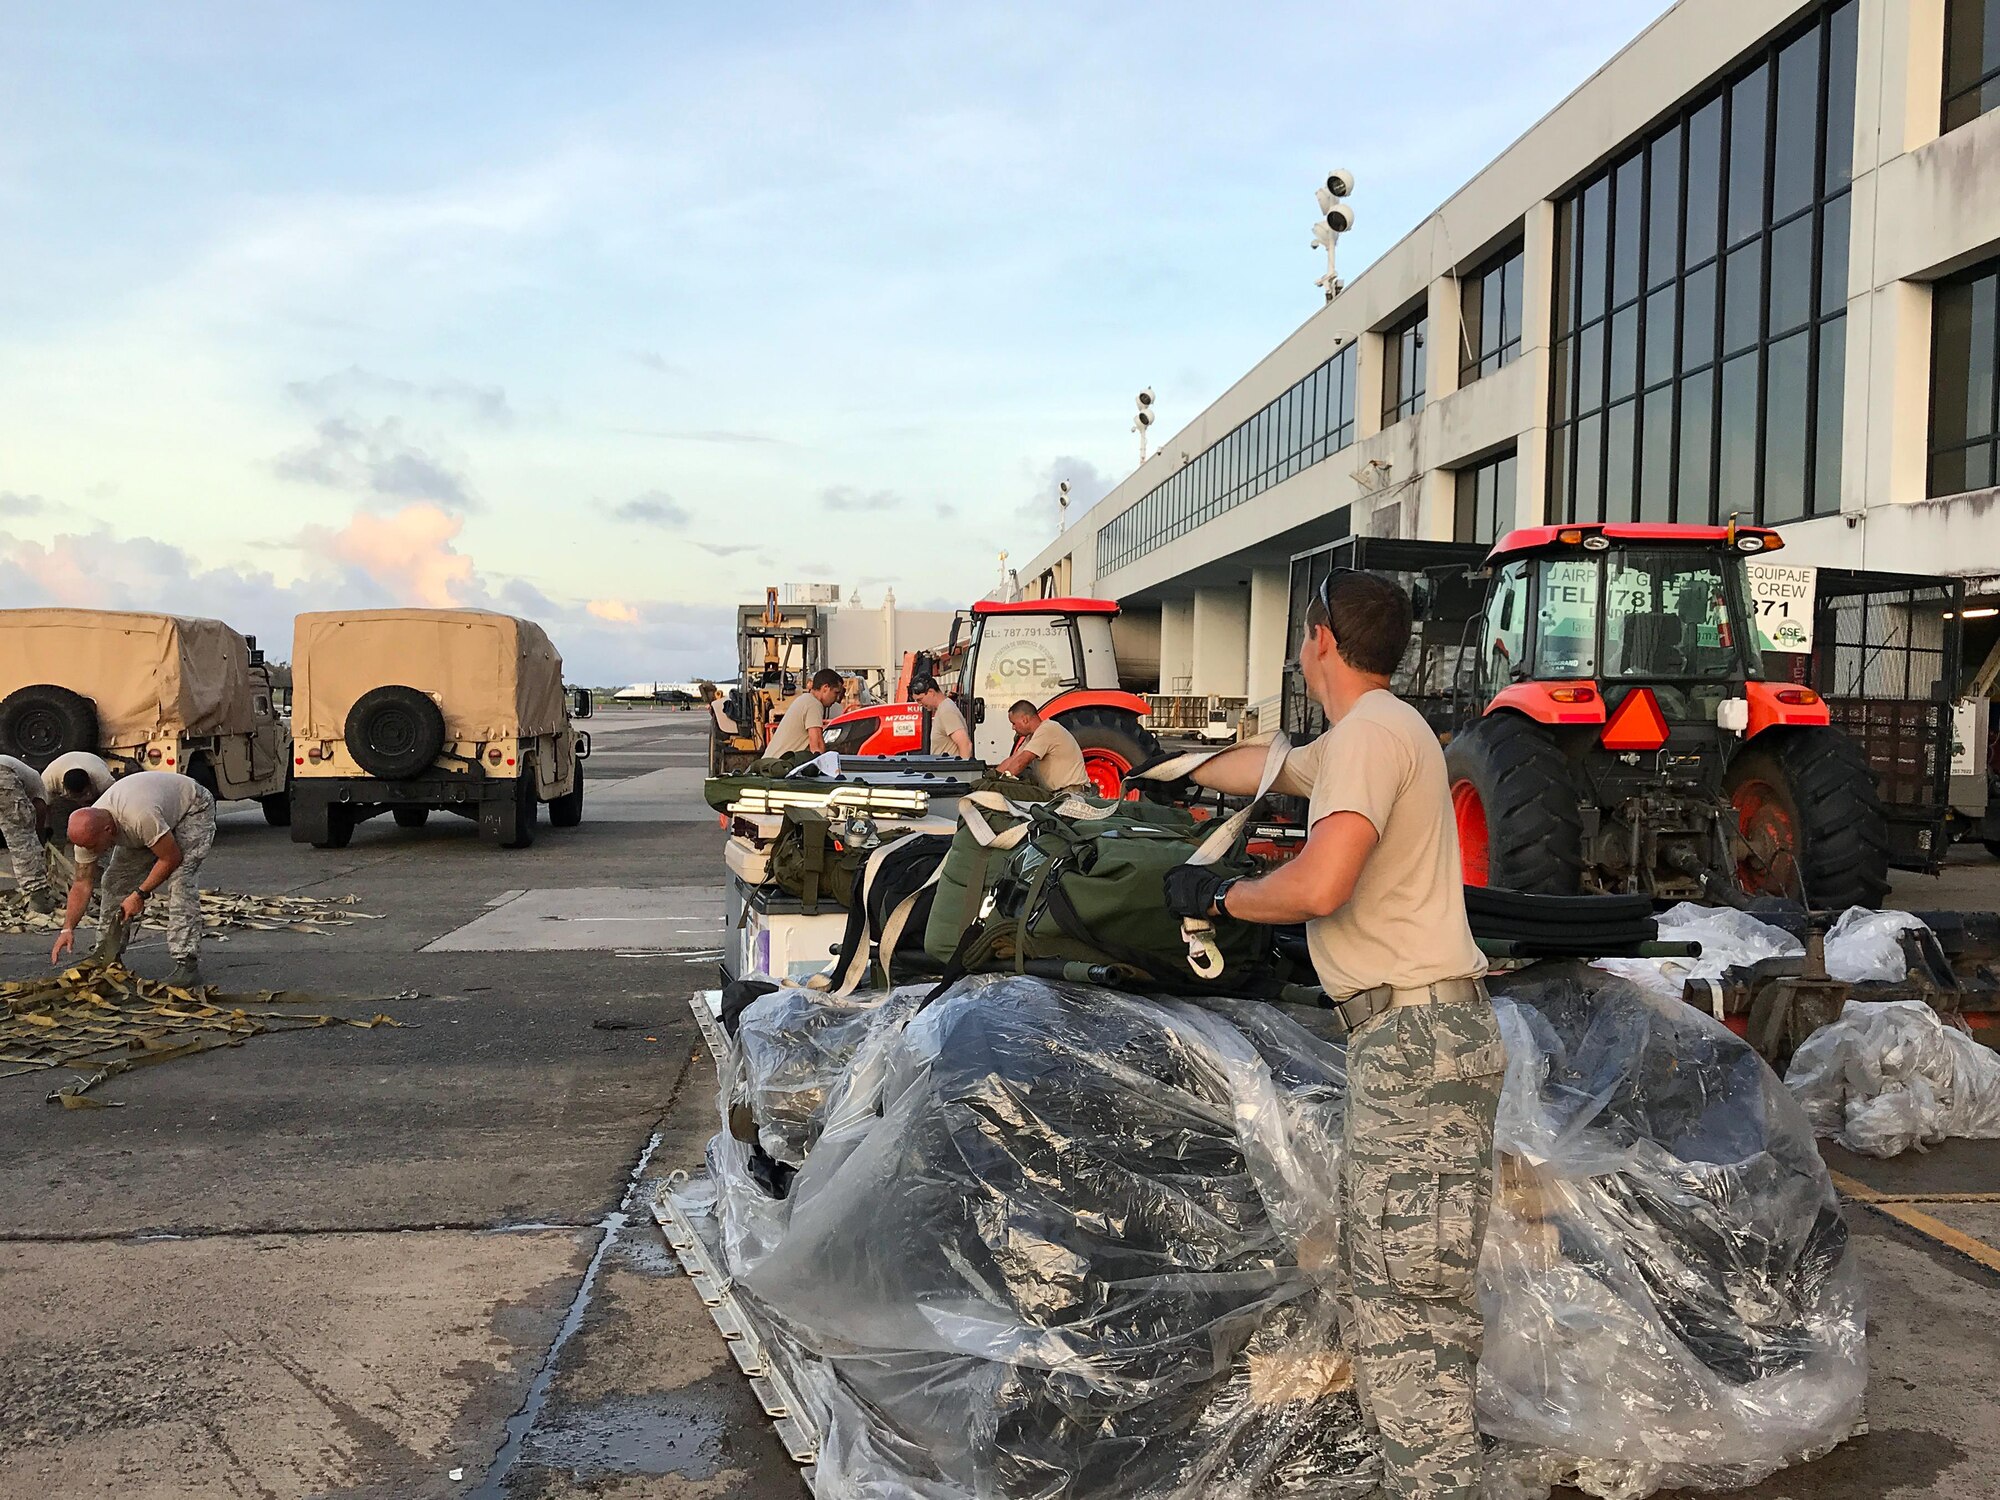 Members of the Disaster Aeromedical Staging Flight (DASF) organize their supplies after unloading at the Luis Muñoz Marín International Airport in San Juan, Puerto Rico. The DASF brought transport vehicles, generators, food, water, medical equipment and other supplies necessary to complete their mission of supporting patients in response to a disaster.